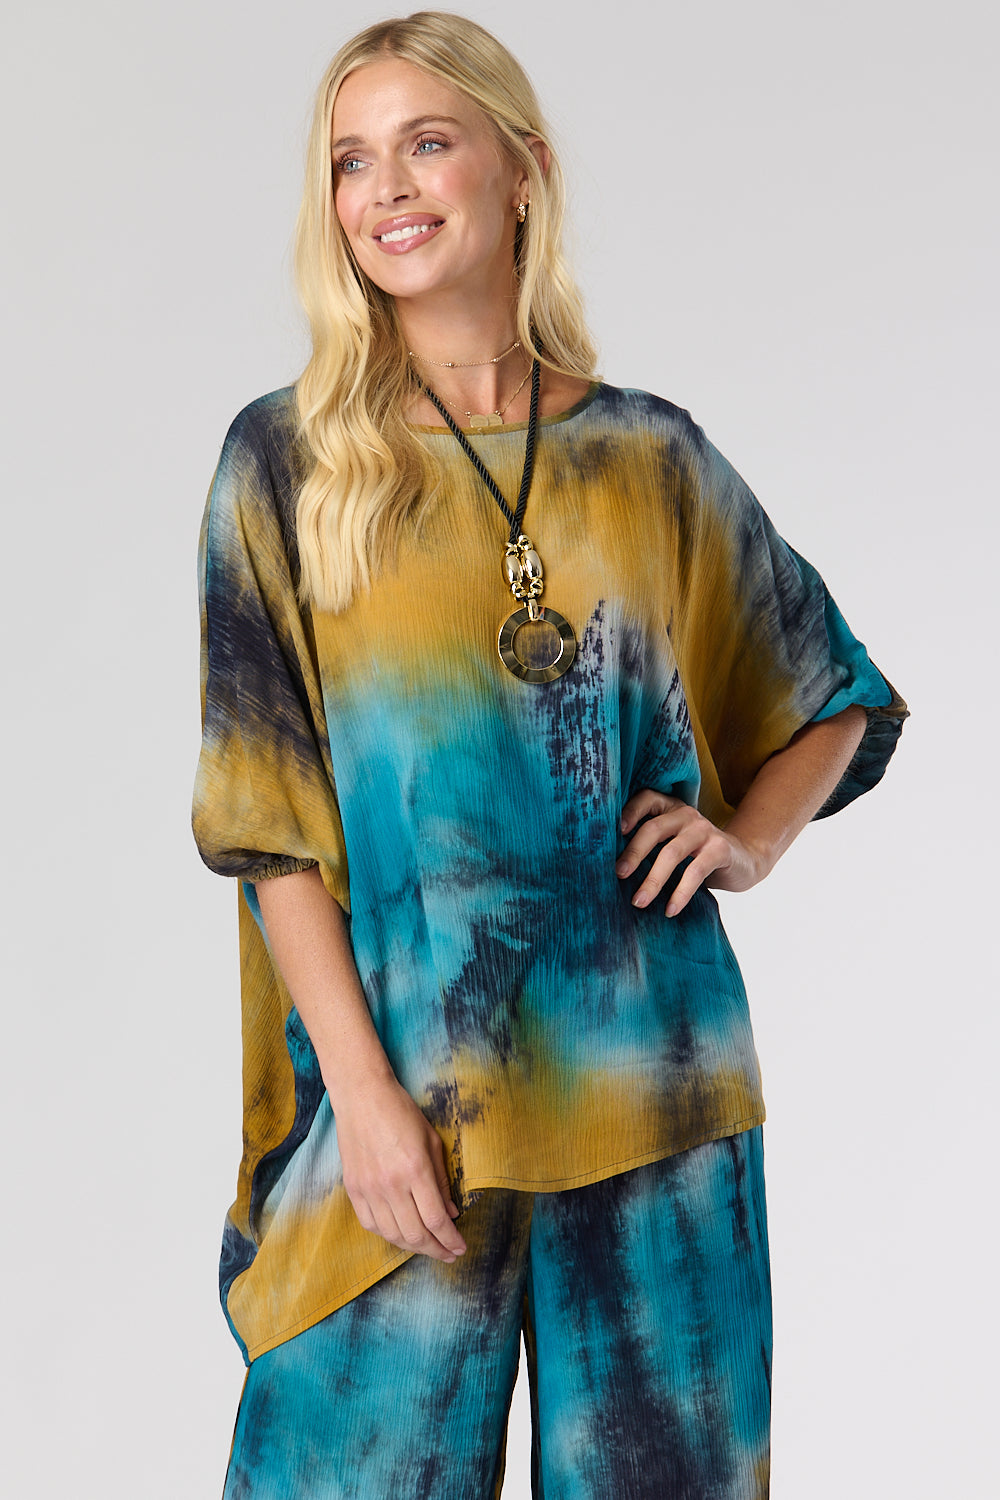 Saloos Elasticated Cuff Top with Necklace